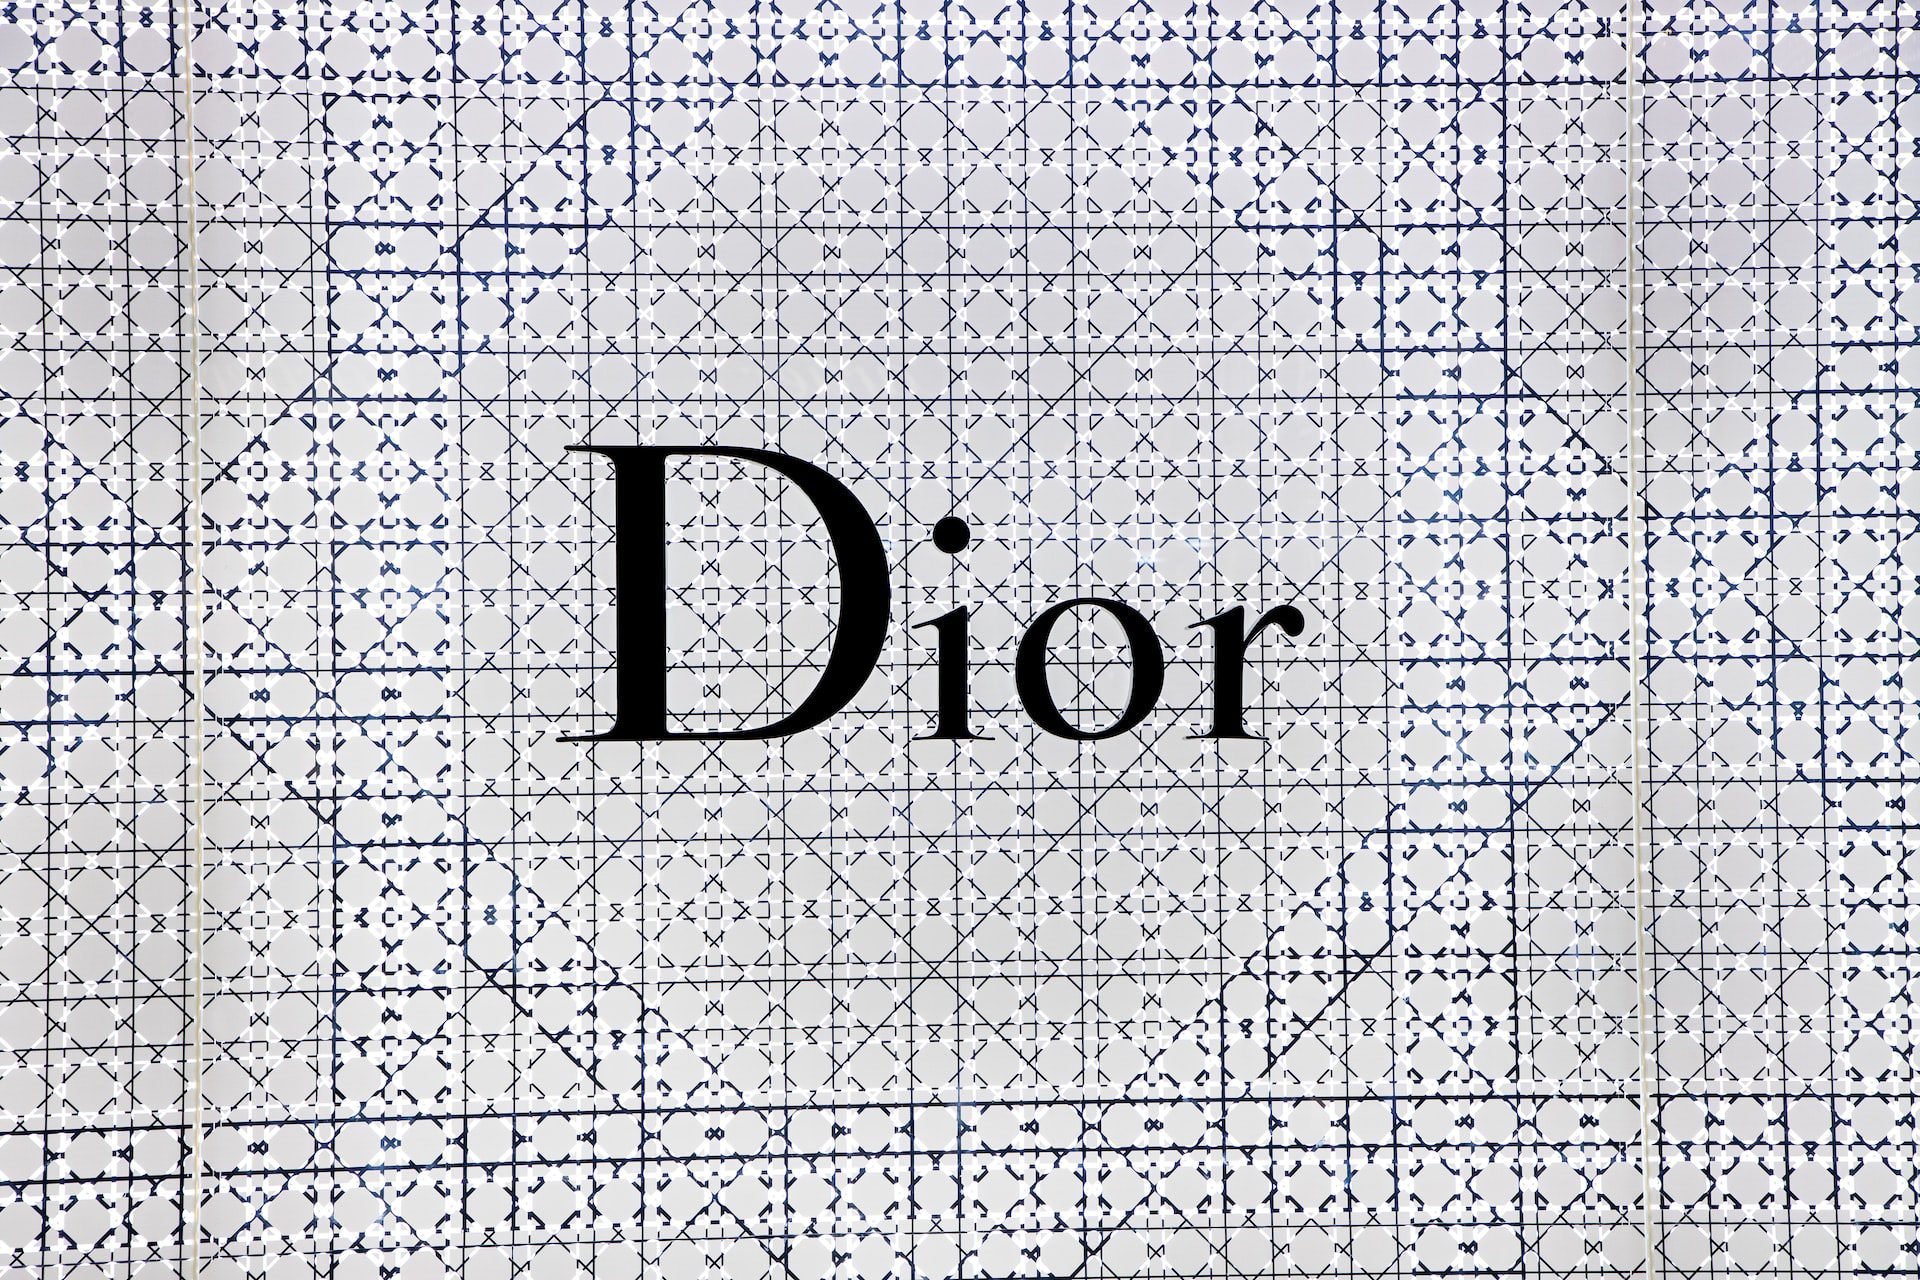 Dior: A History of the fashion house and its founder